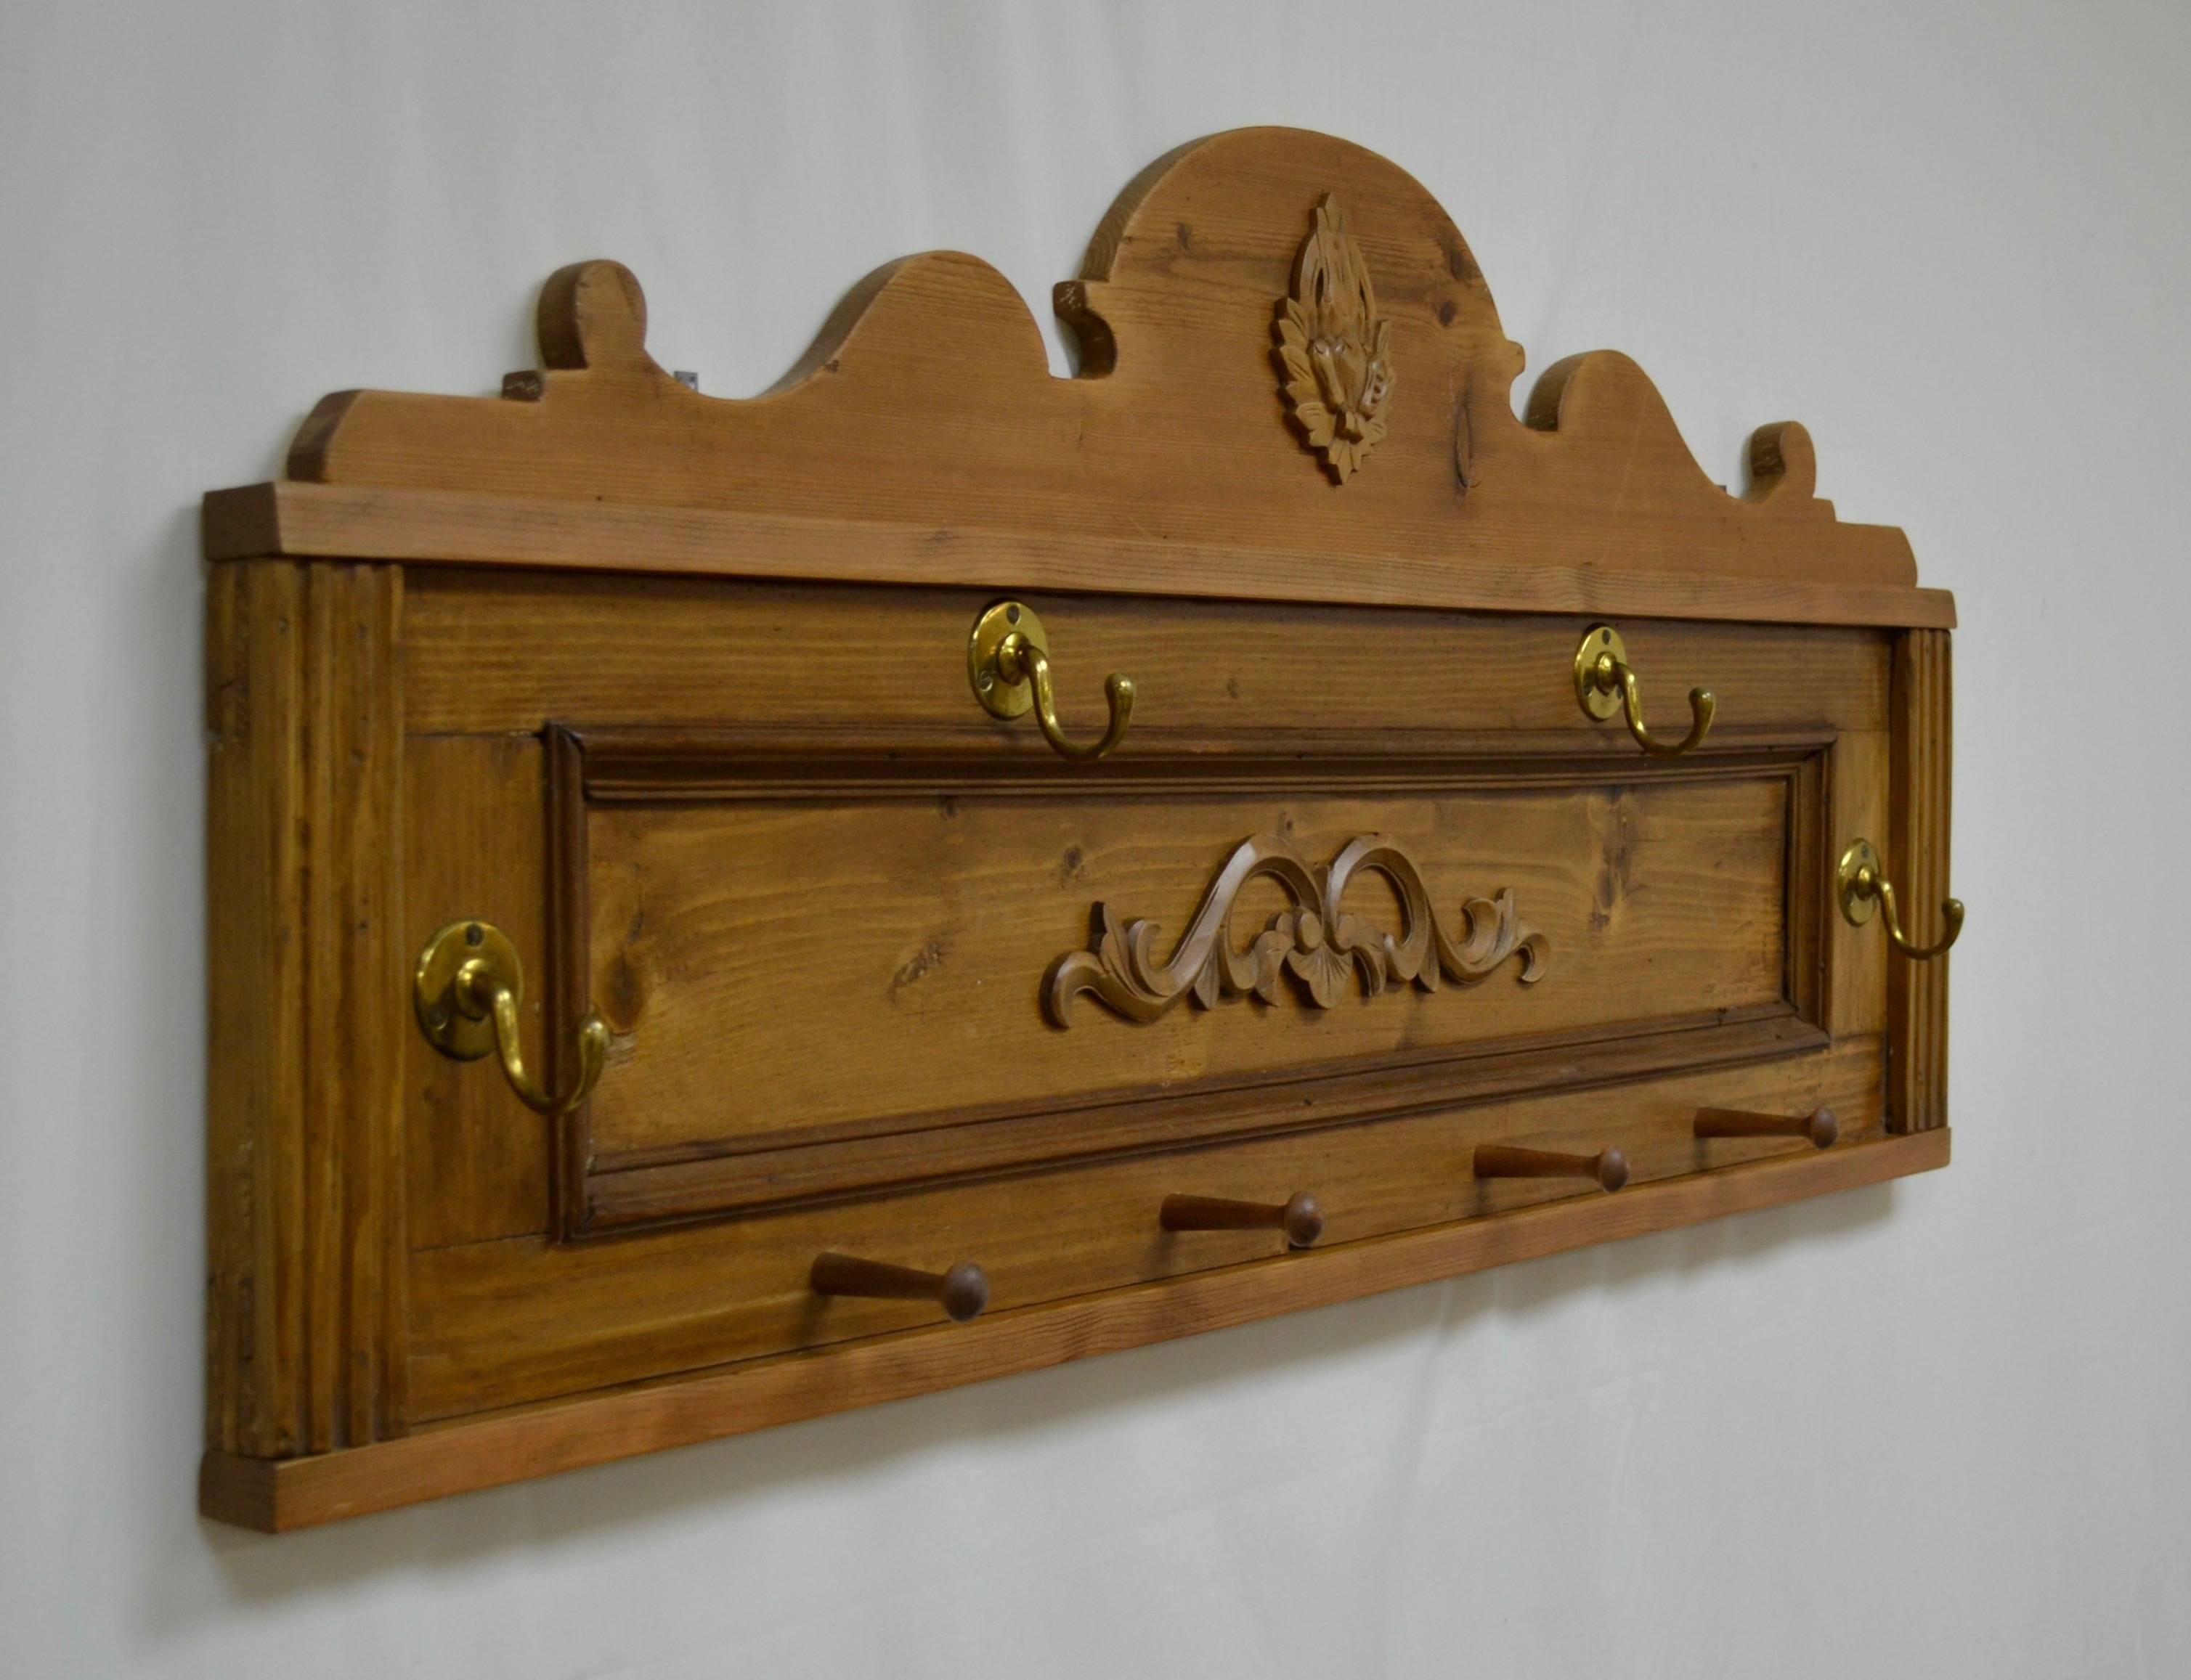 In a creative example of re-purposing, an orphan paneled backboard from an antique pine buffet, complete with its original fluting, has been married to the abandoned crest from an antique pine armoire. The application of two hardwood decorative